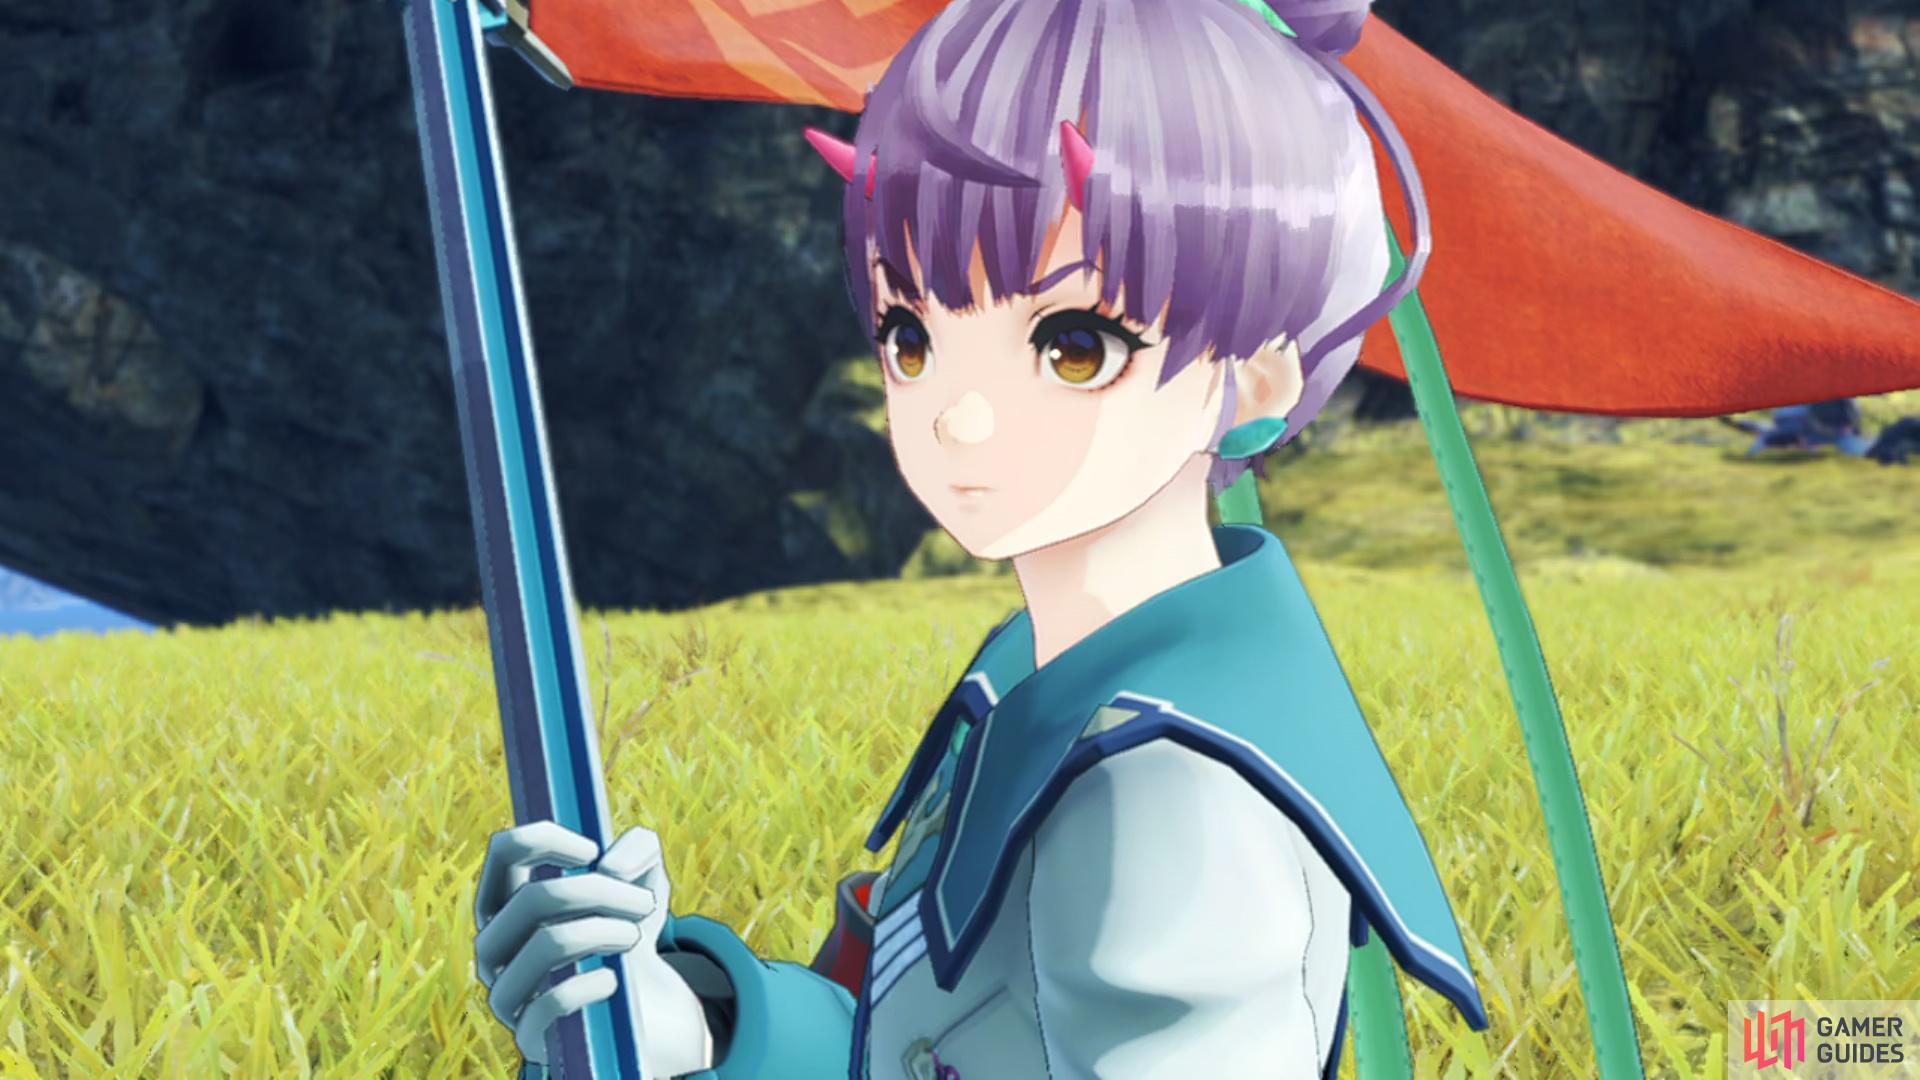 Transparent Dreams is Fiona's Hero Quest in Chapter 5 of Xenoblade Chronicles 3.